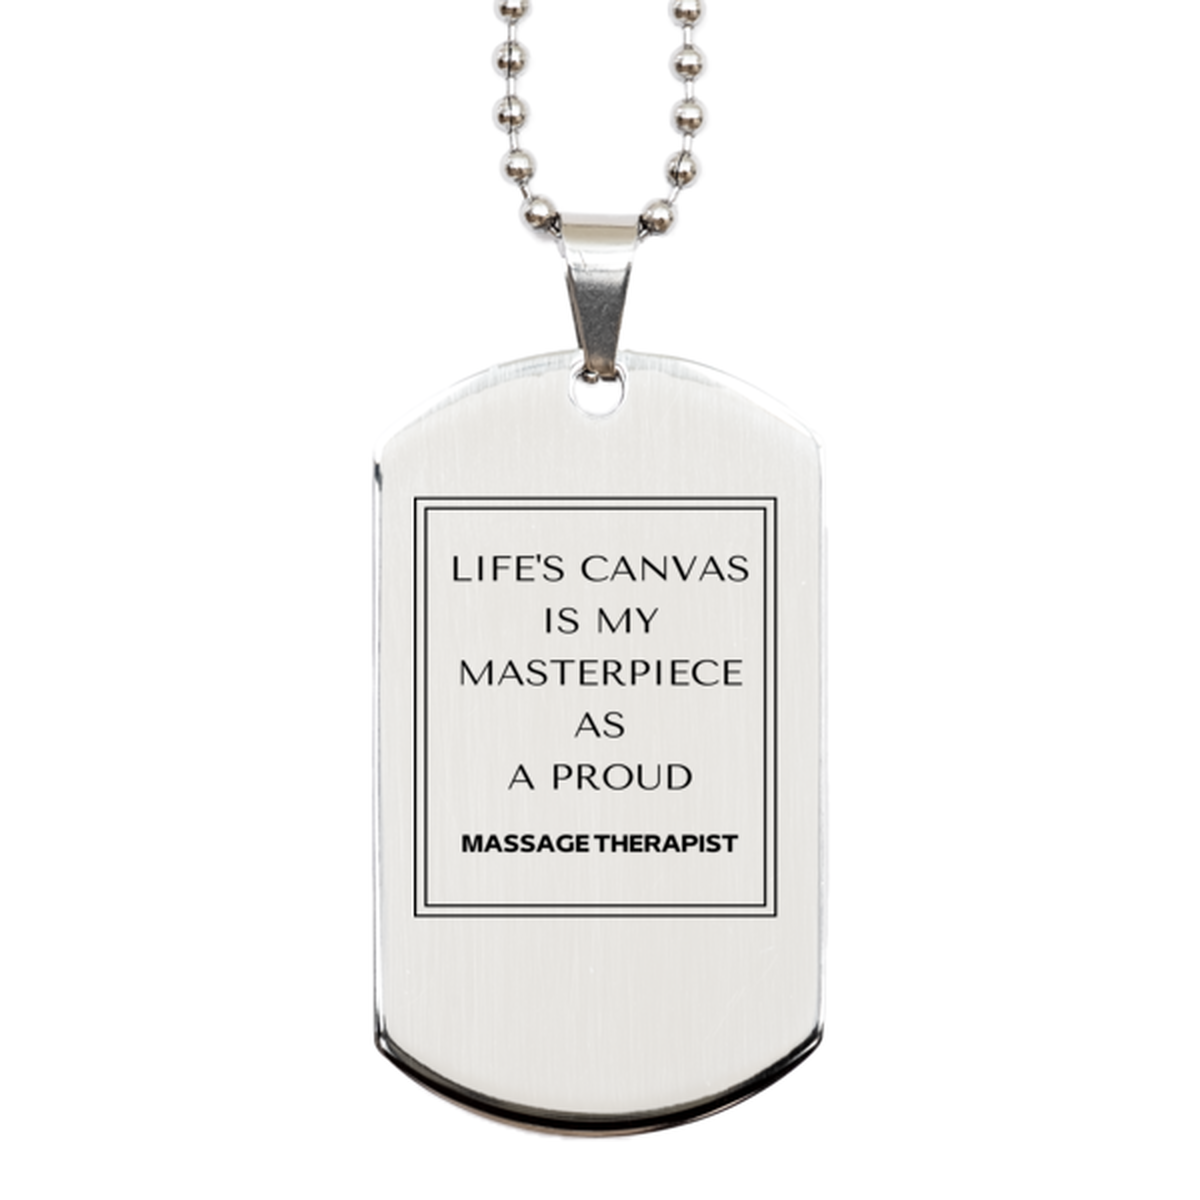 Proud Massage Therapist Gifts, Life's canvas is my masterpiece, Epic Birthday Christmas Unique Silver Dog Tag For Massage Therapist, Coworkers, Men, Women, Friends